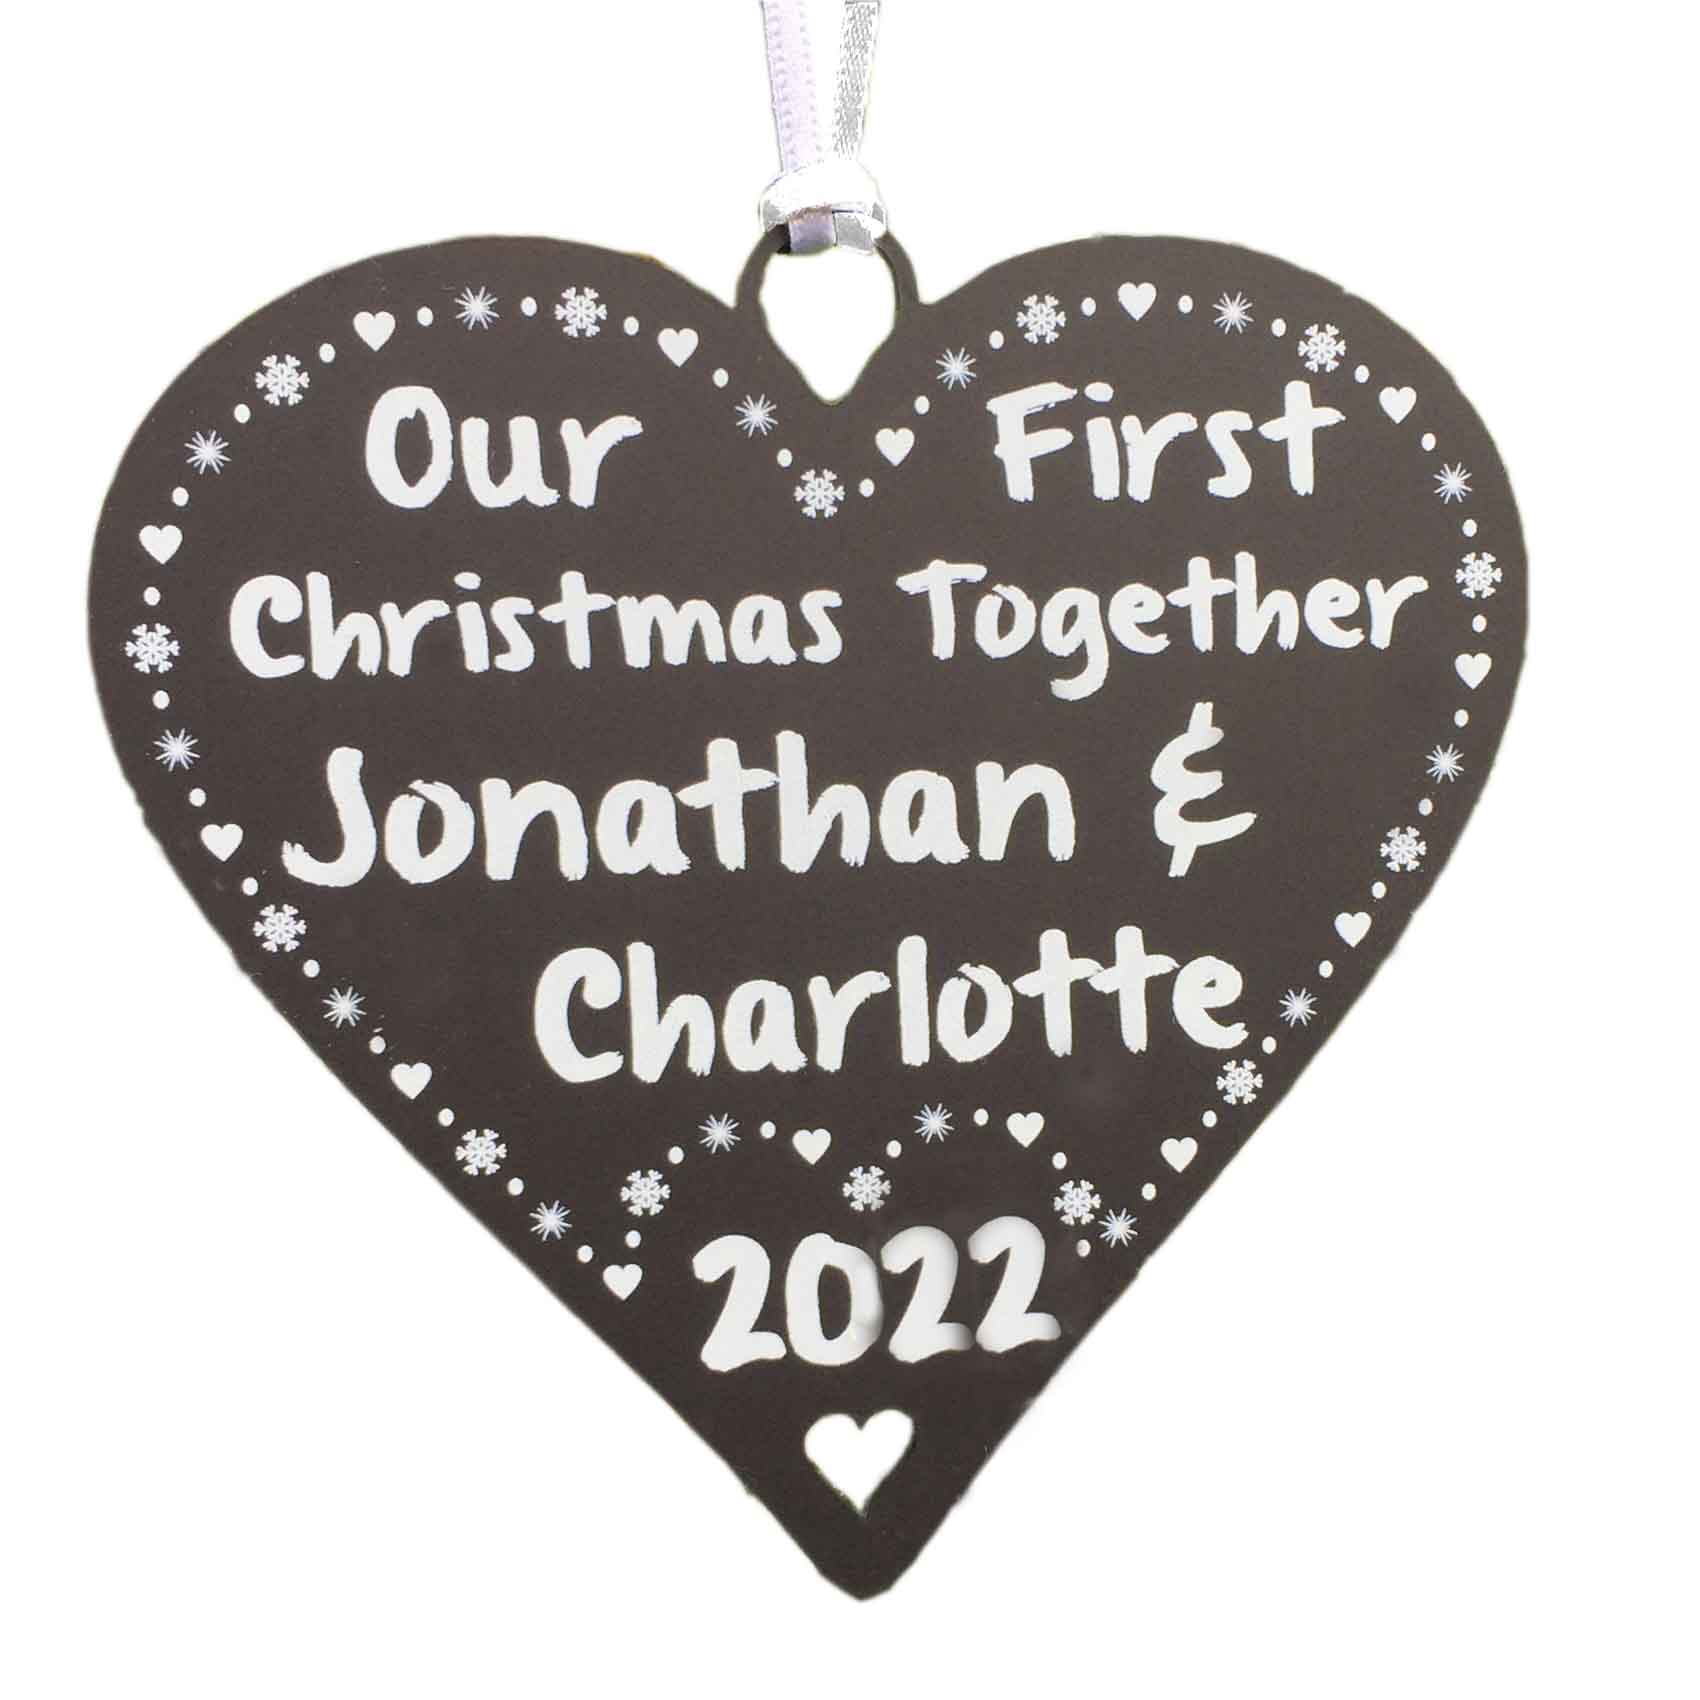 First Christmas Together in 2023 as Boyfriend Girlfriend Personalised Bauble - 10cm Heart